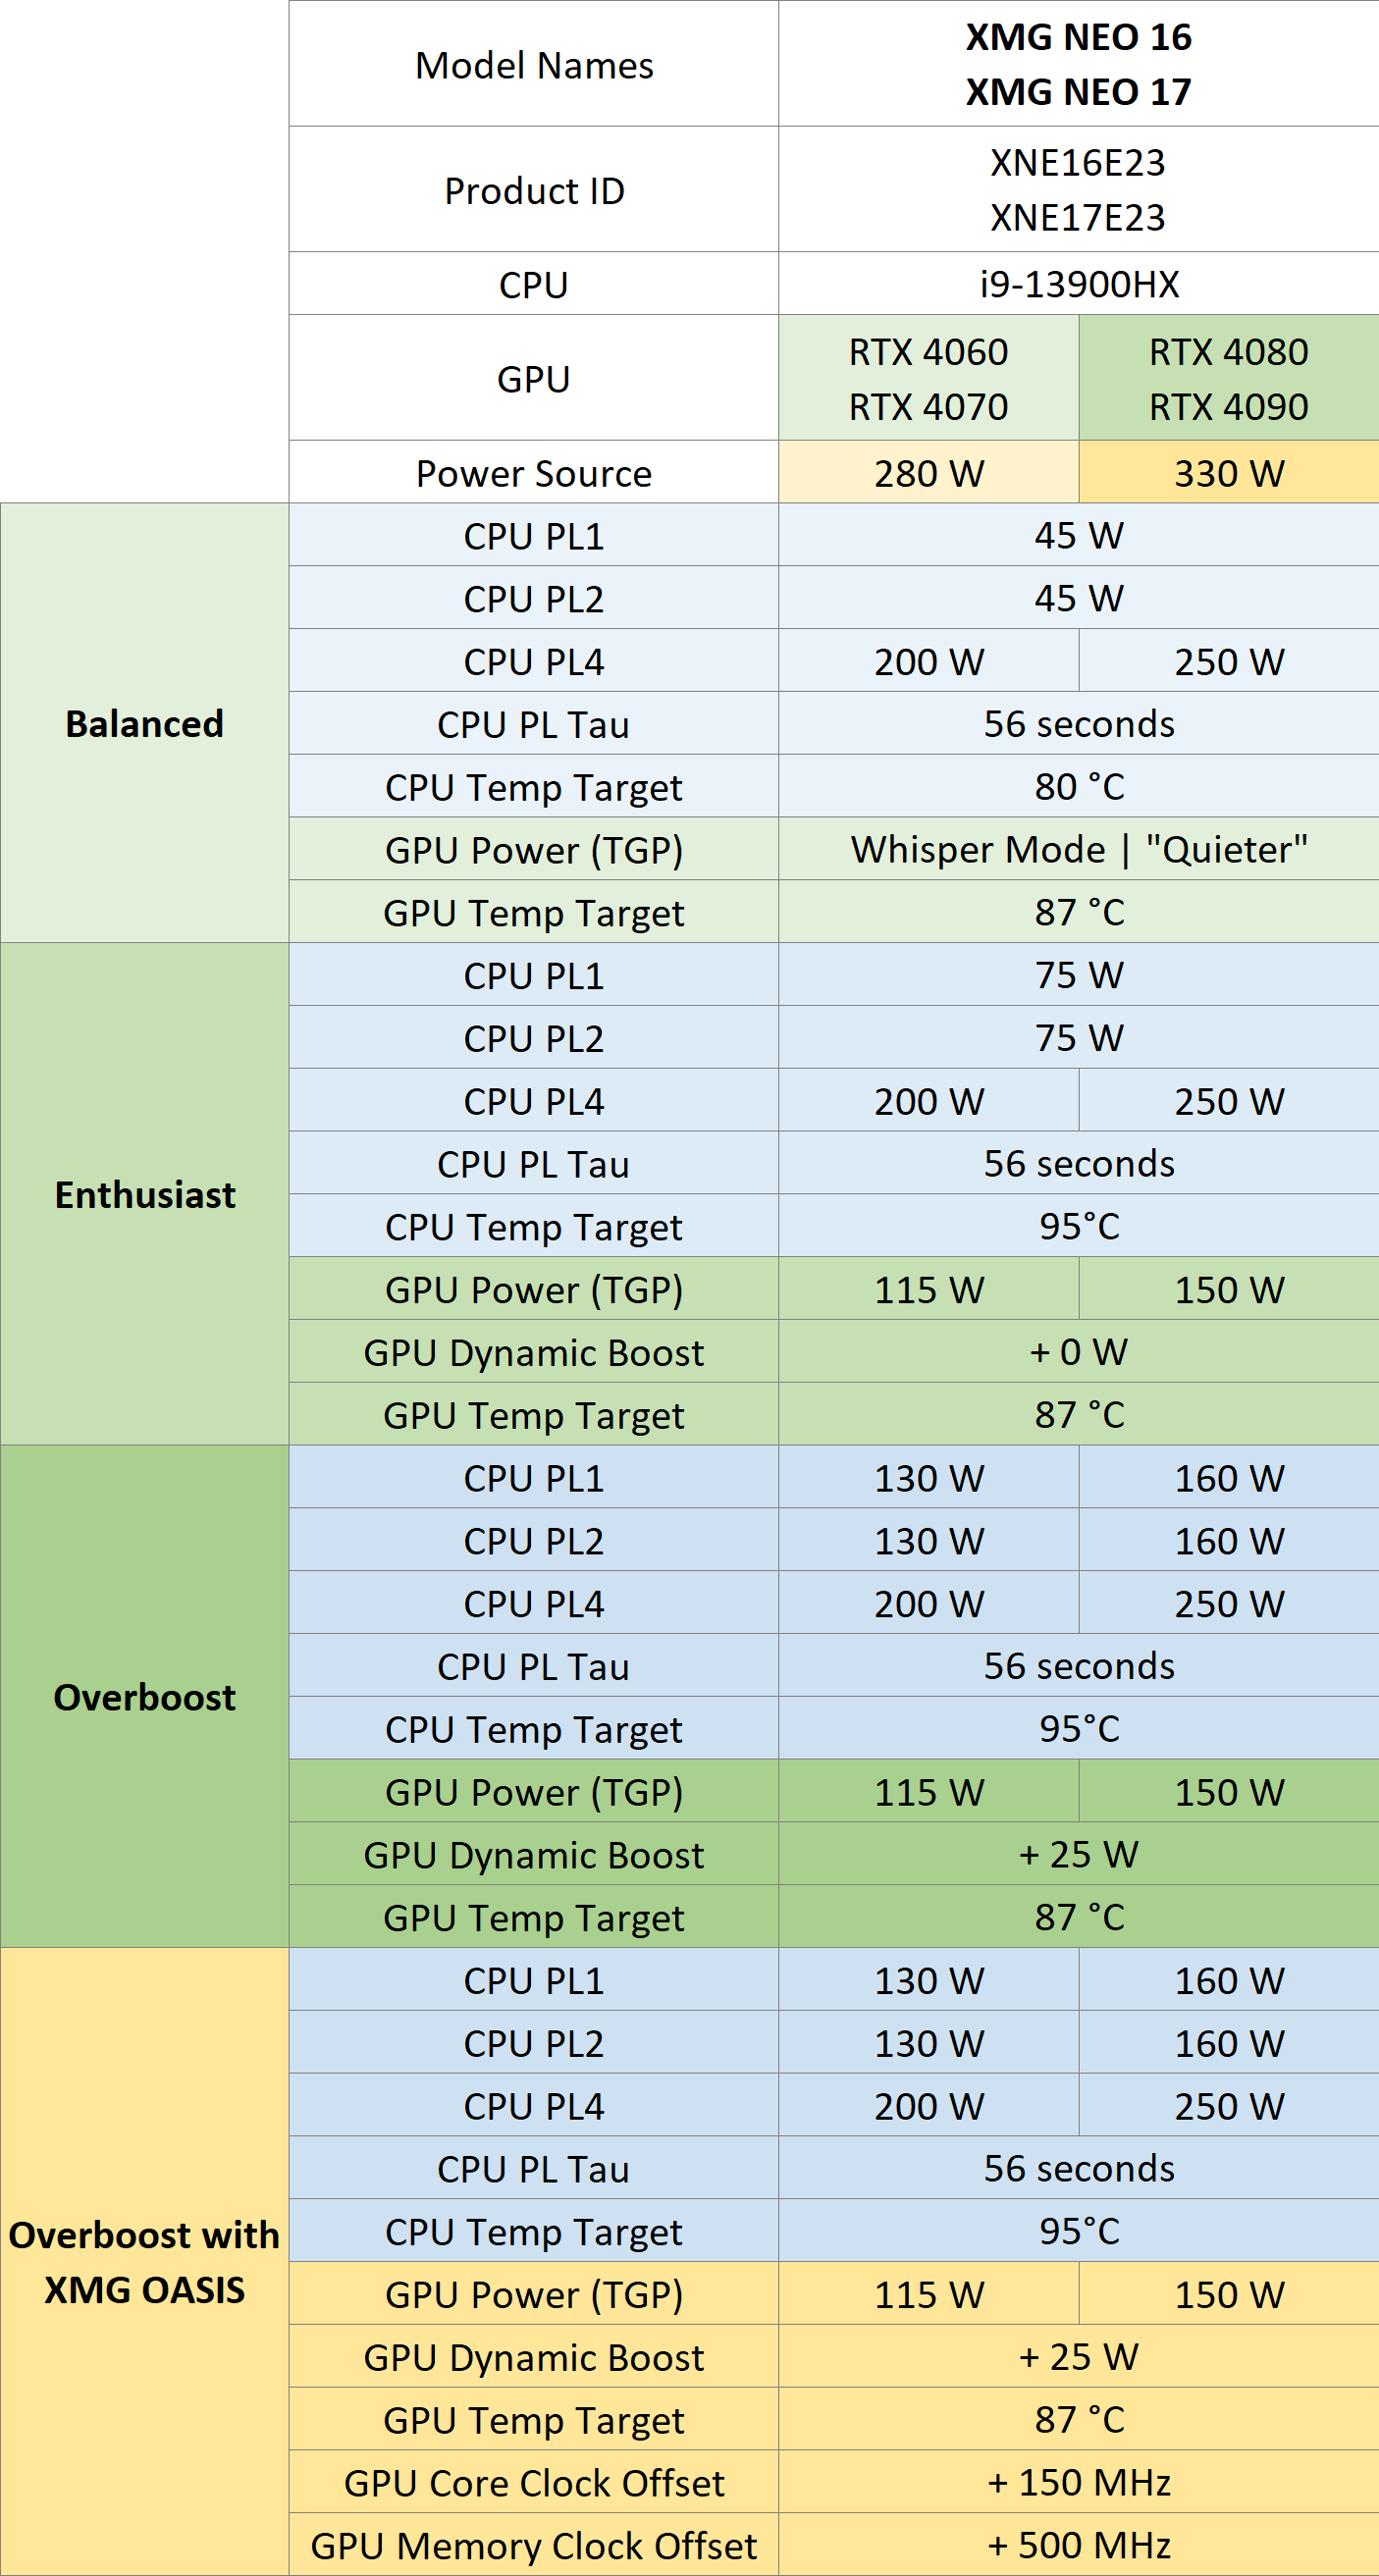 xmg-neo_e23_performance-profiles_2023-02-14.png